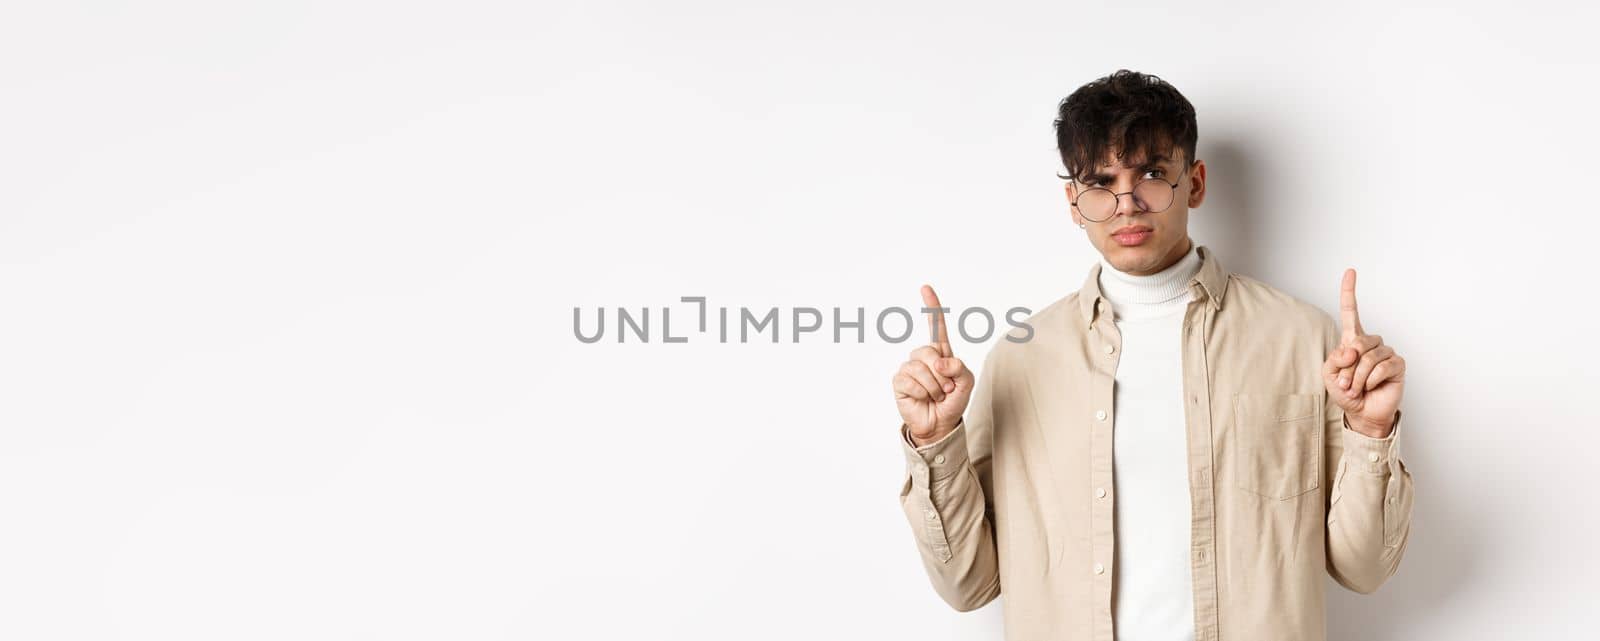 Portrait of young male model in glasses looking suspicious and frowning, pointing fingers up with disbelief, standing on white background.